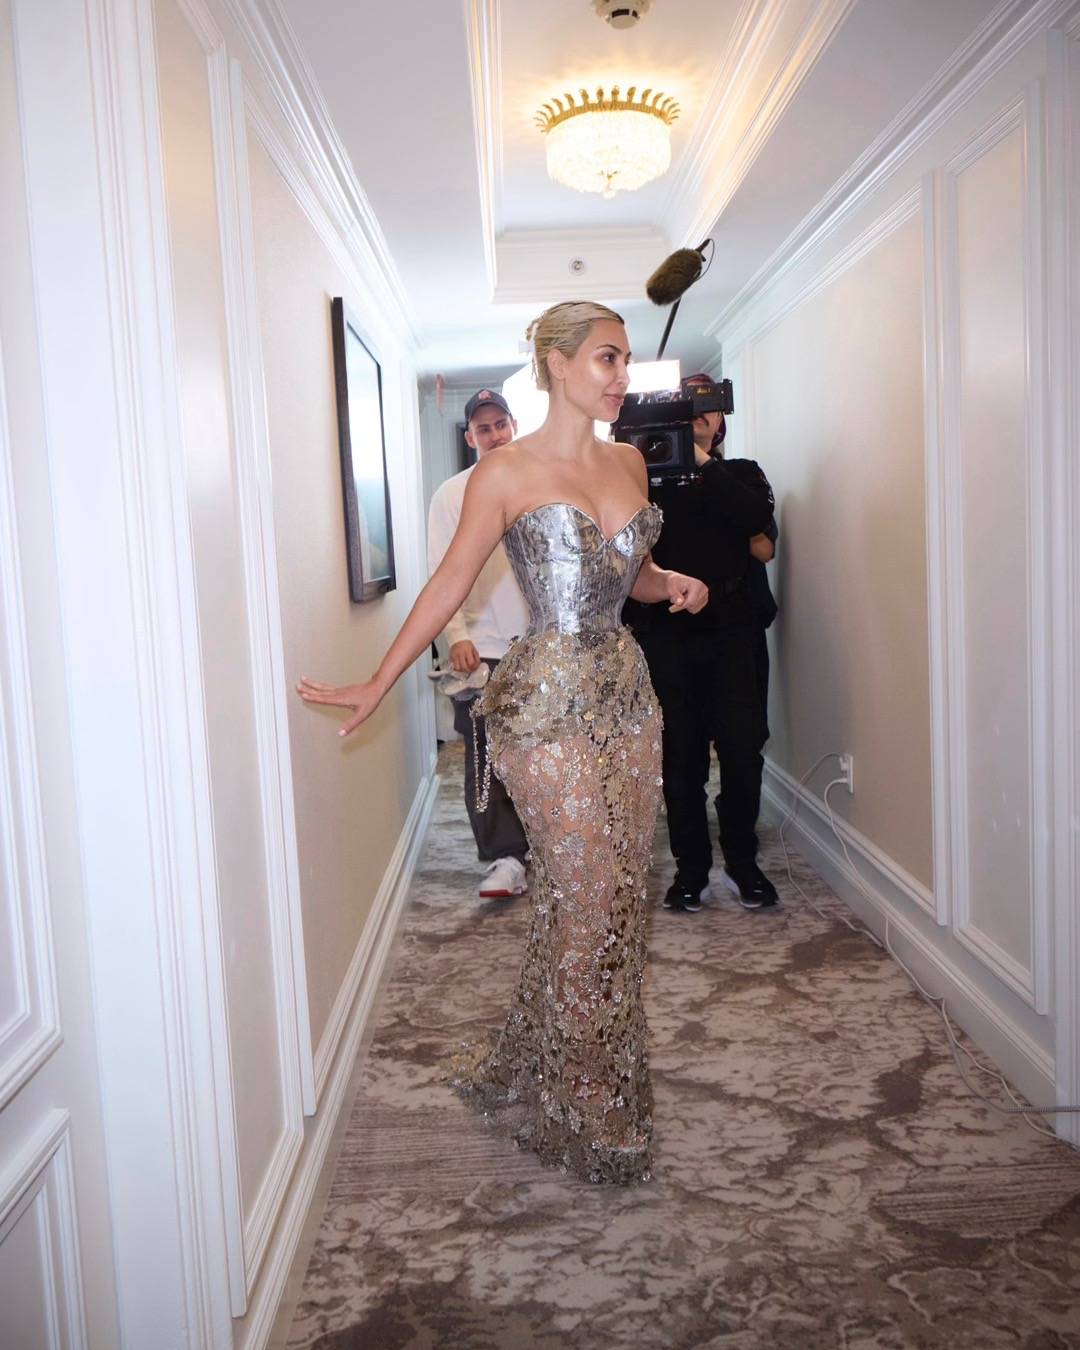 North also shared behind-the-scenes photos of Kim at the Met Gala